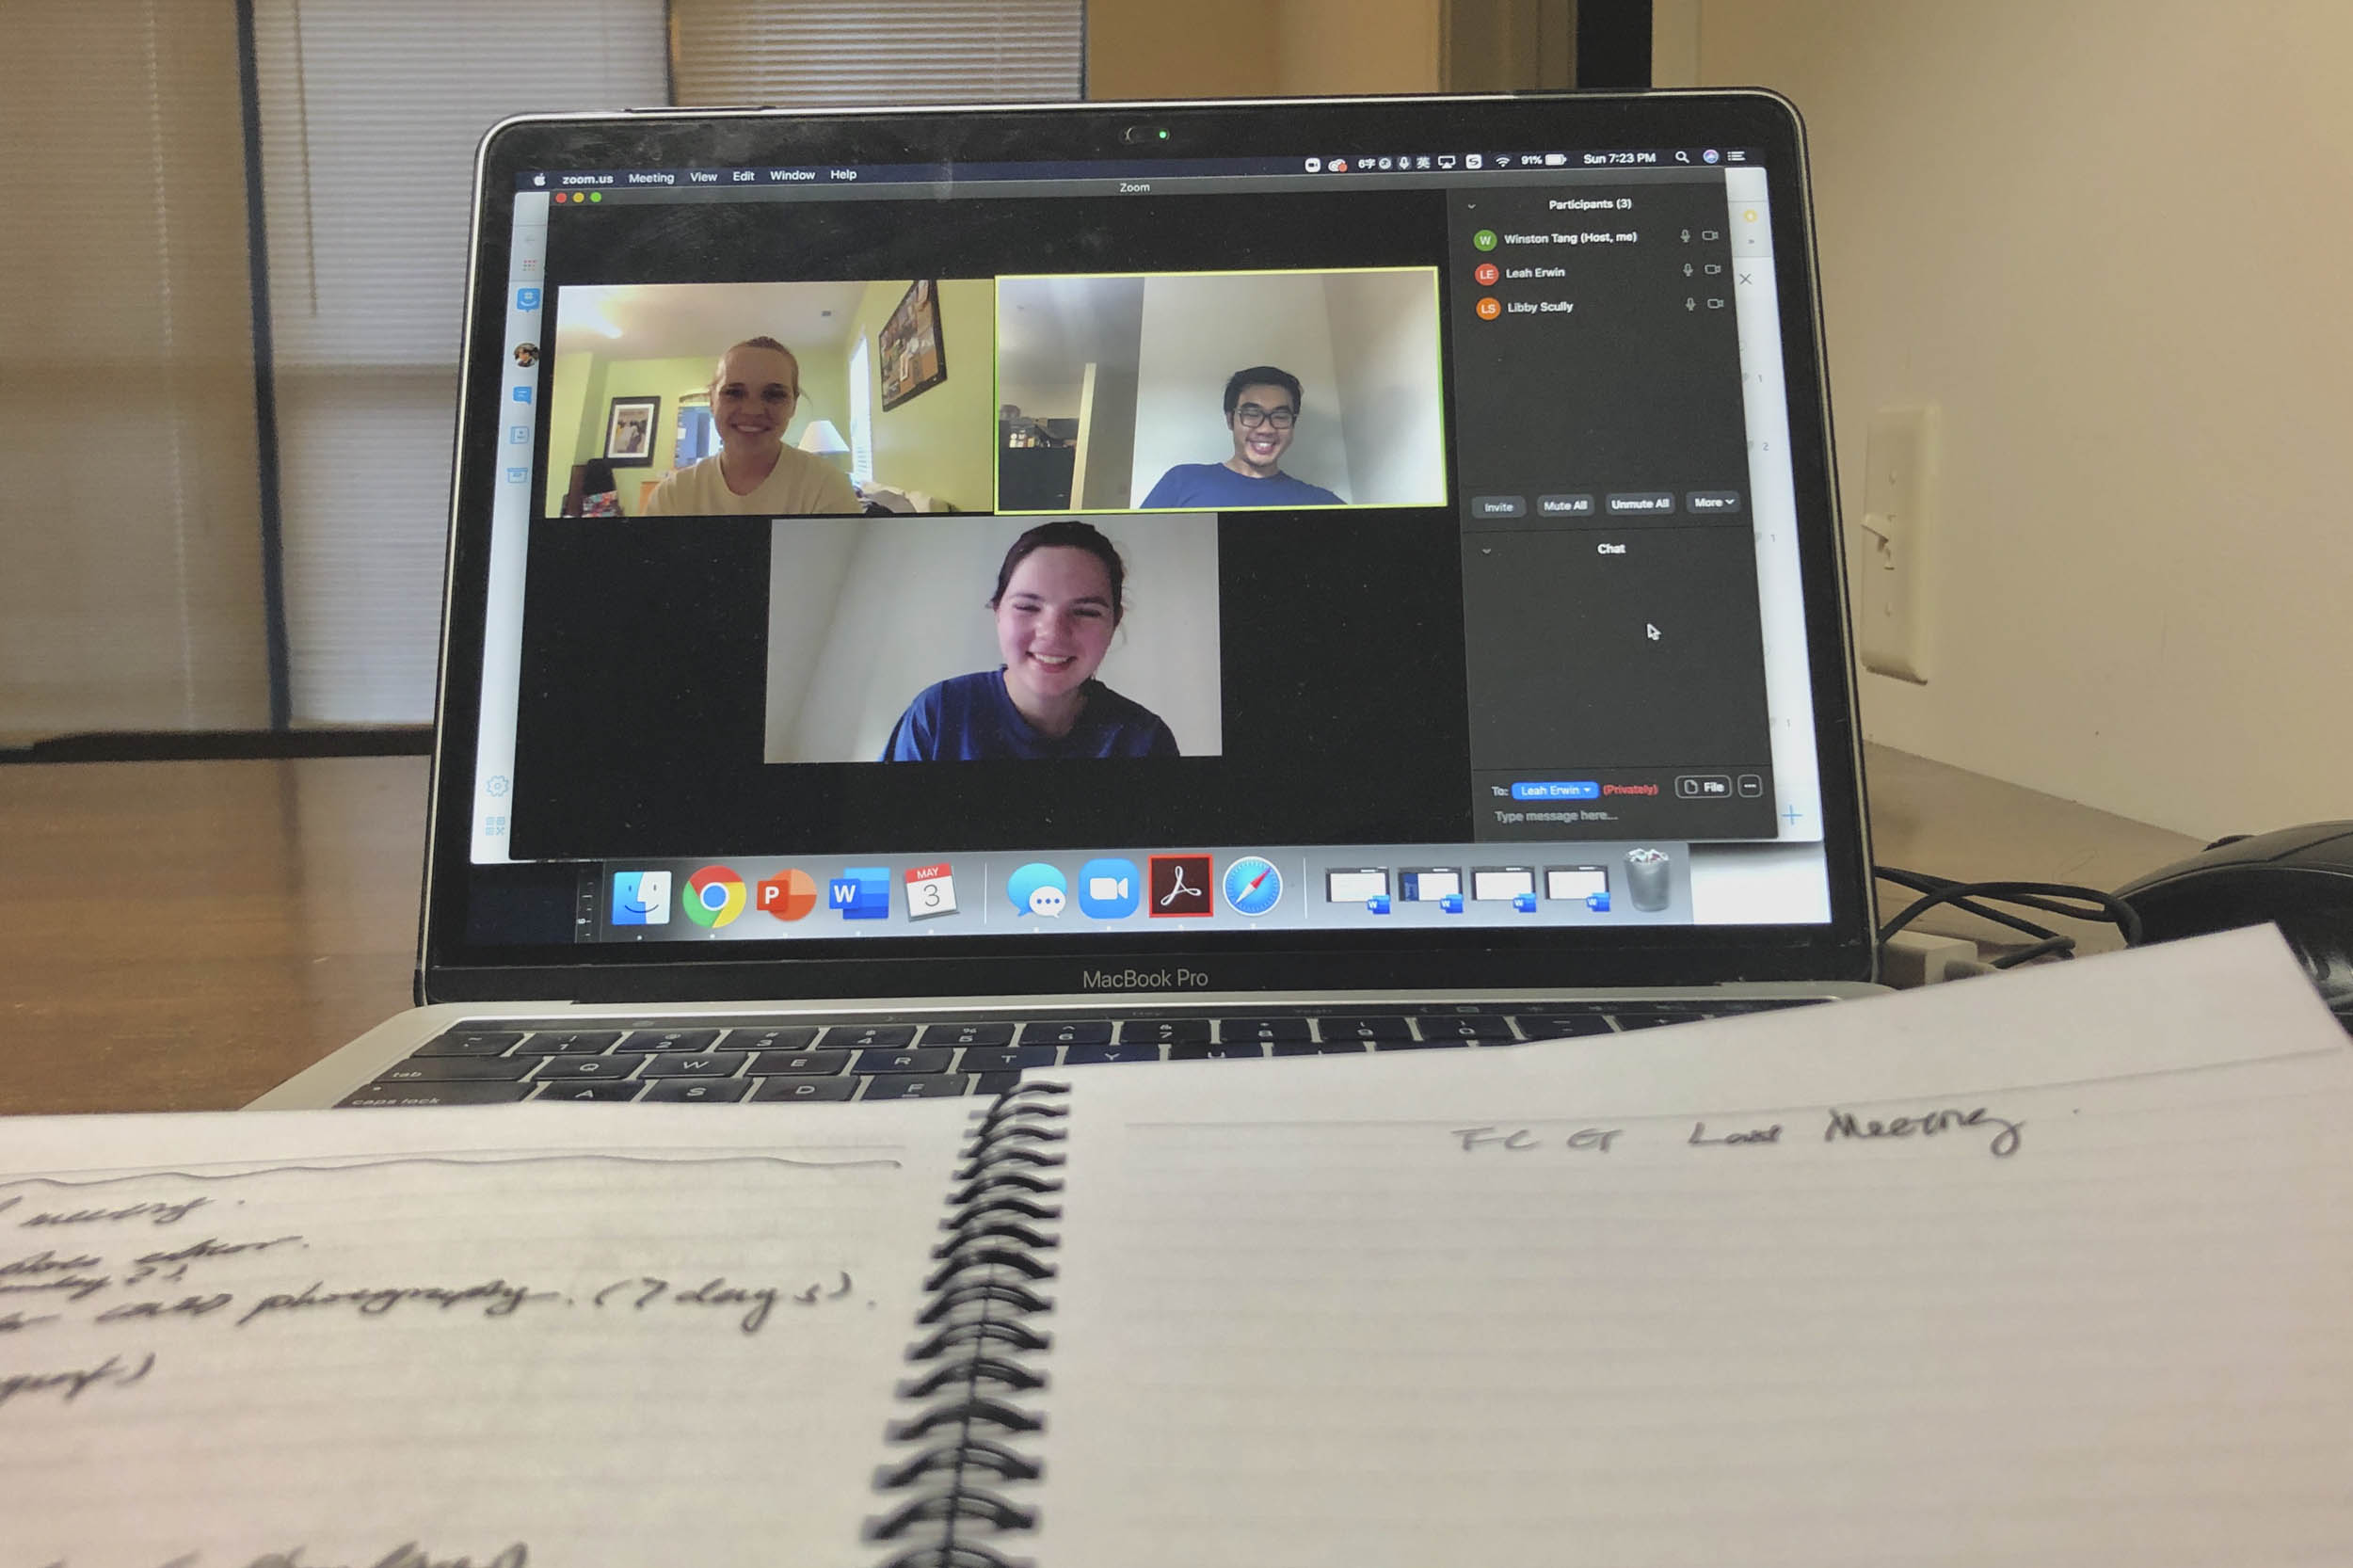 Notebook laying on a laptops keyboard while a zoom meeting is on the screen with 3 attendees